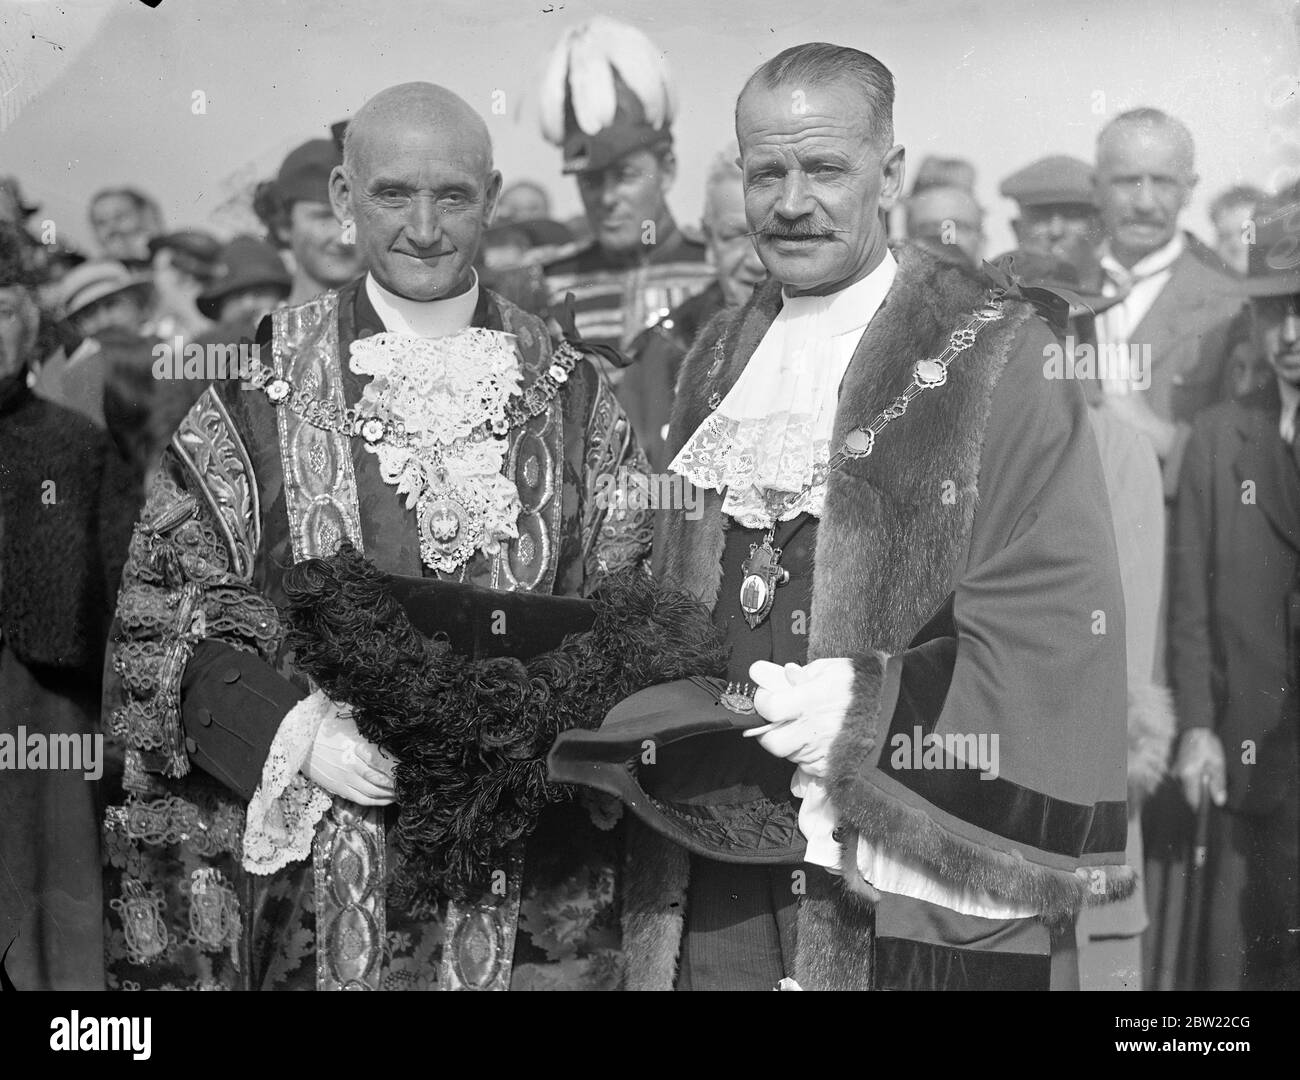 The Lord Mayor of London, Sir George Broadbridge(left) with Charter Mayor councillor CH Allen.at Romford. He was there to present at two important ceremonies when the Essex suburb became a Borough. He presented the Charter of incorporation at the new town Hall for the opening. 16 September 1937. Stock Photo